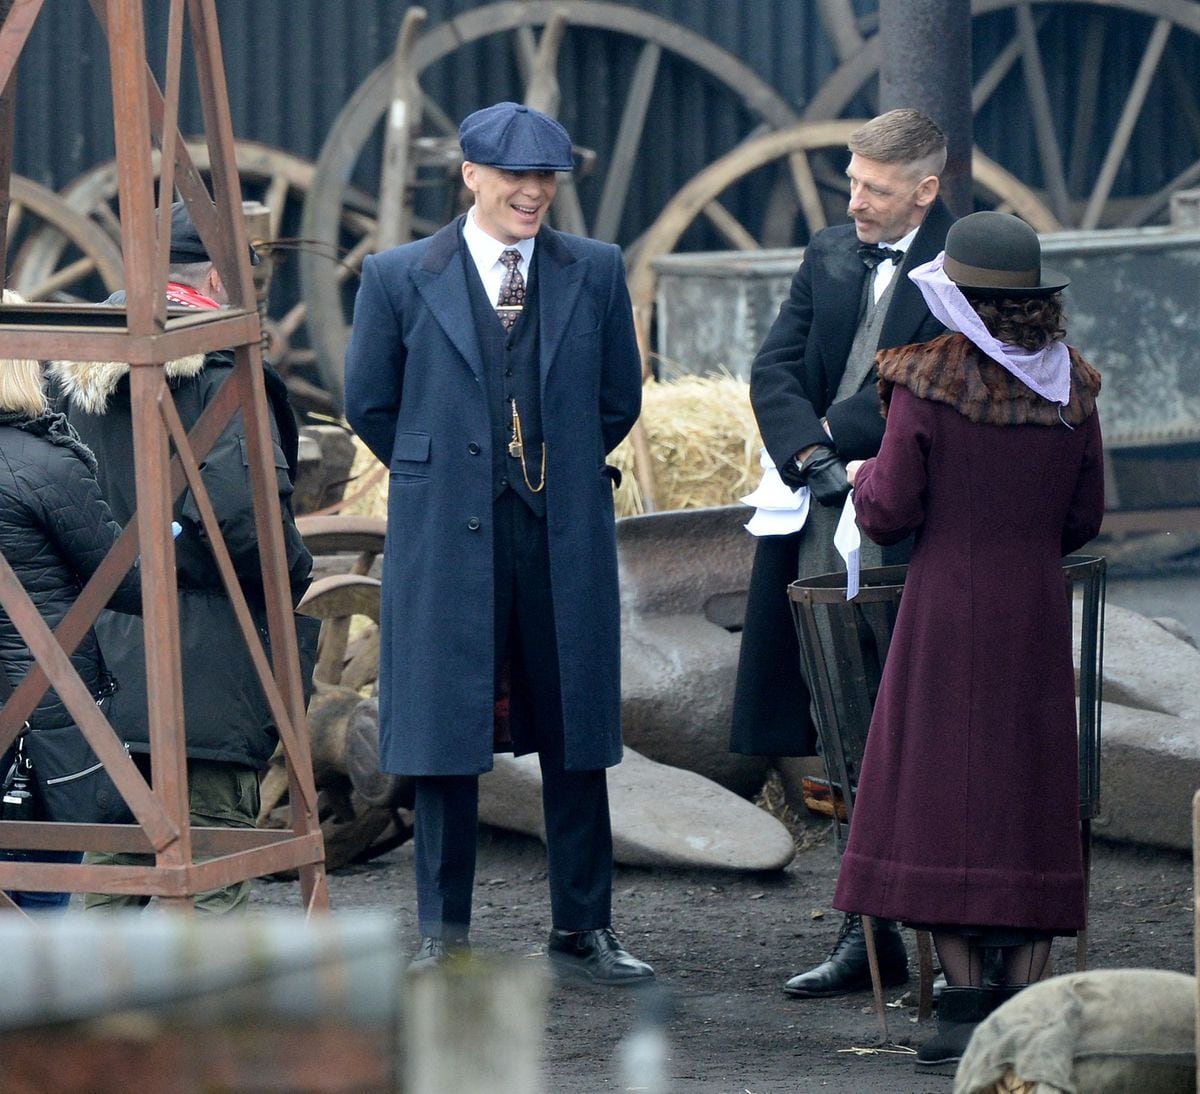 Cillian Murphy, Paul Anderson and Helen McCrory filming Peaky Blinders at the Black Country Living Museum